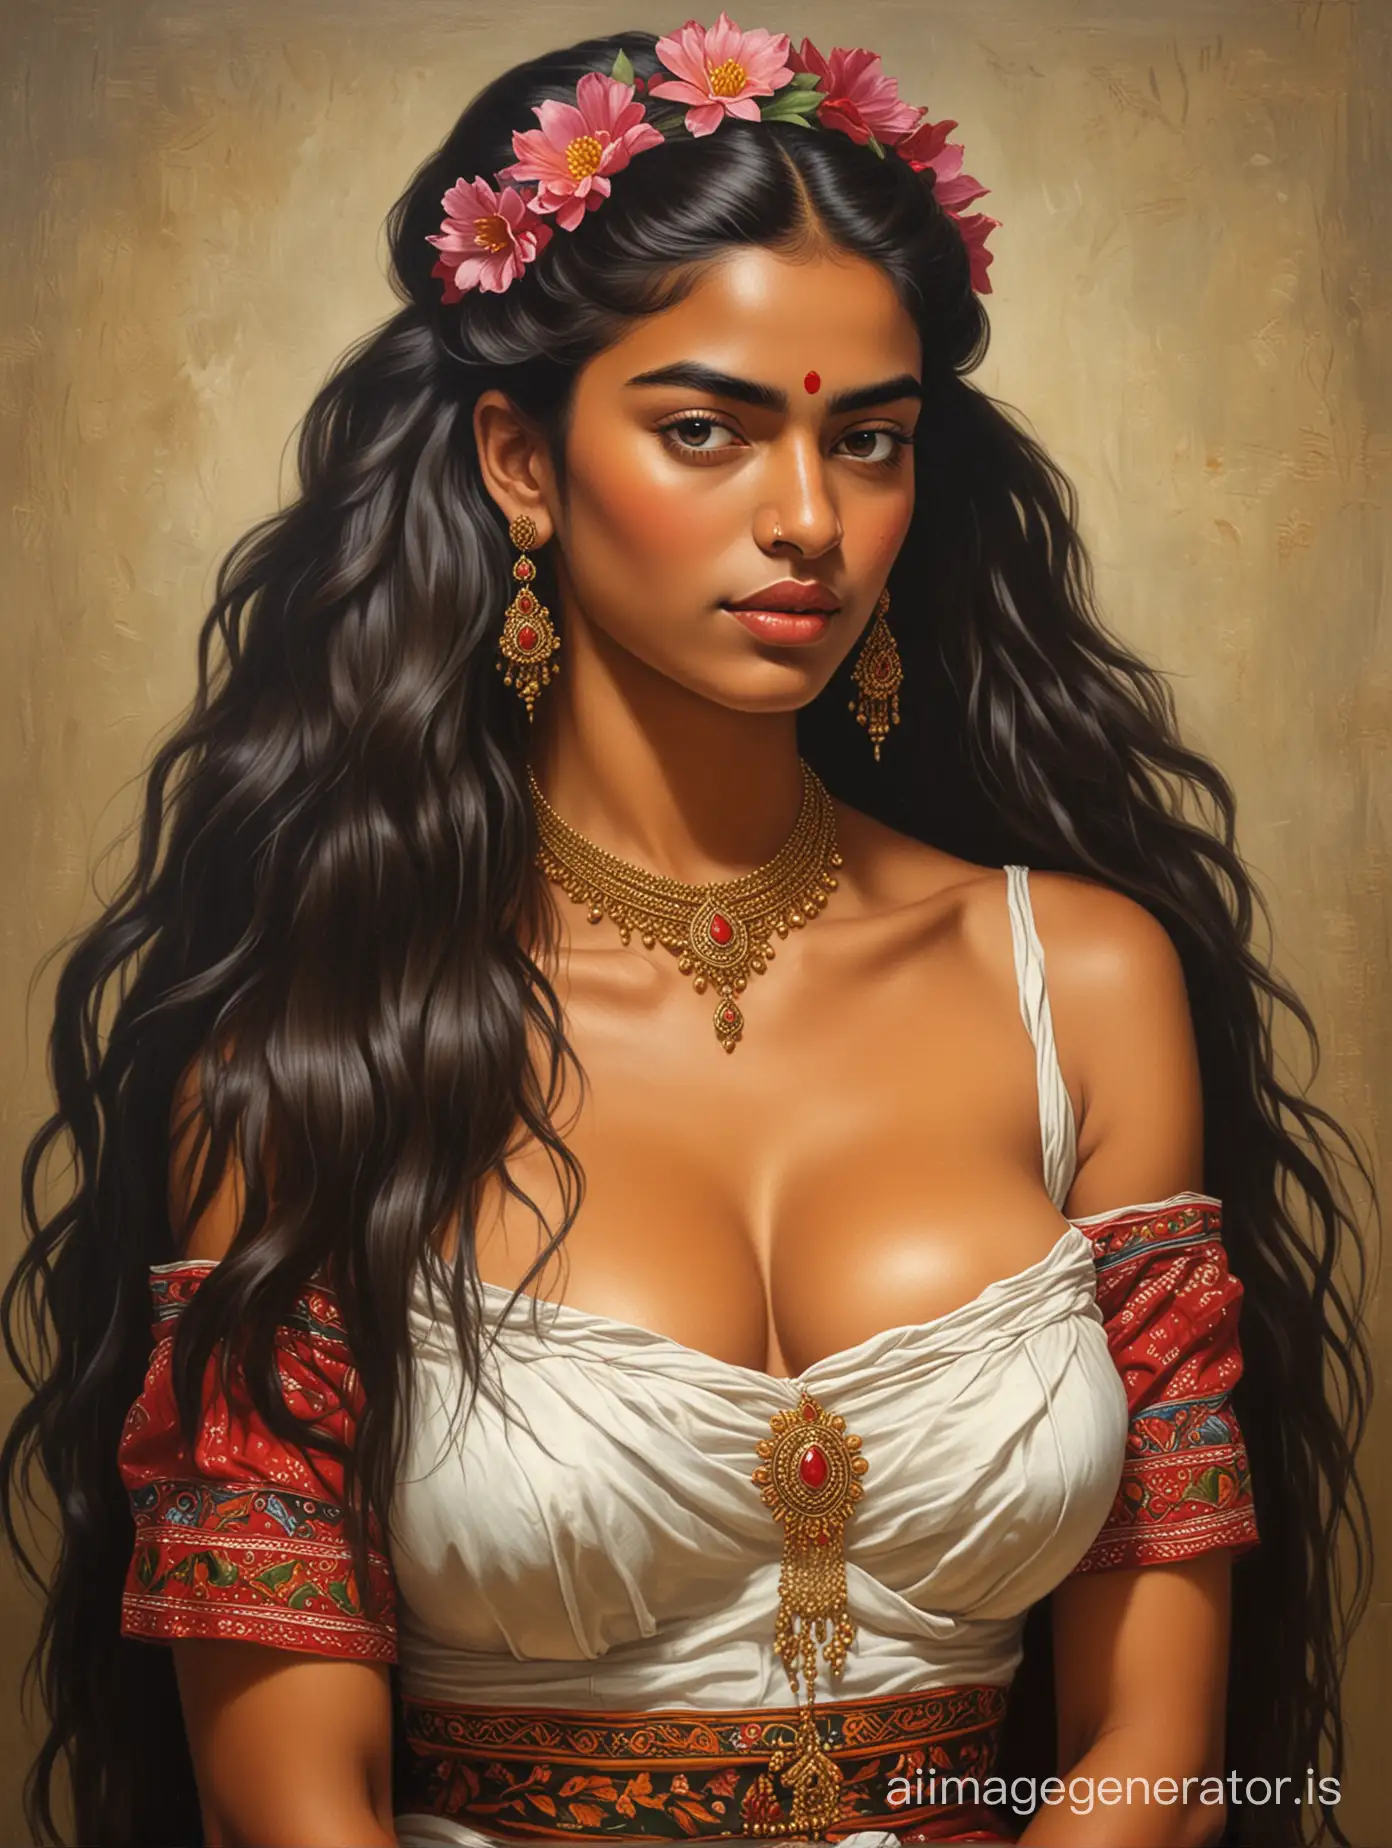 Kahlo oil painting of a very busty skinny Tamil princess with long flowing hair